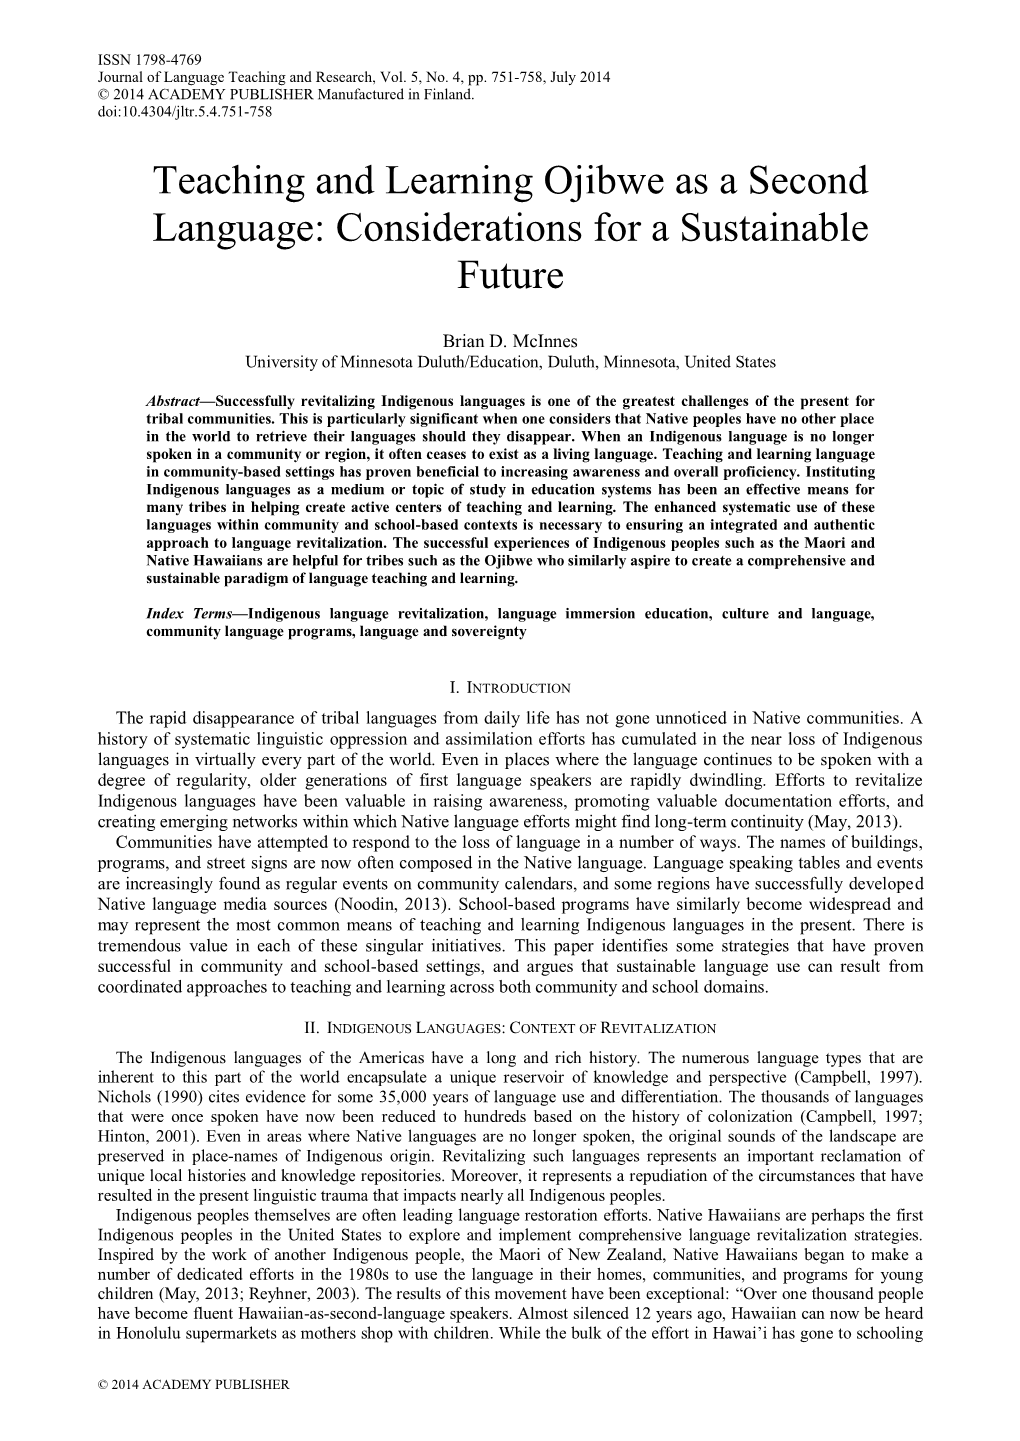 Teaching and Learning Ojibwe As a Second Language: Considerations for a Sustainable Future